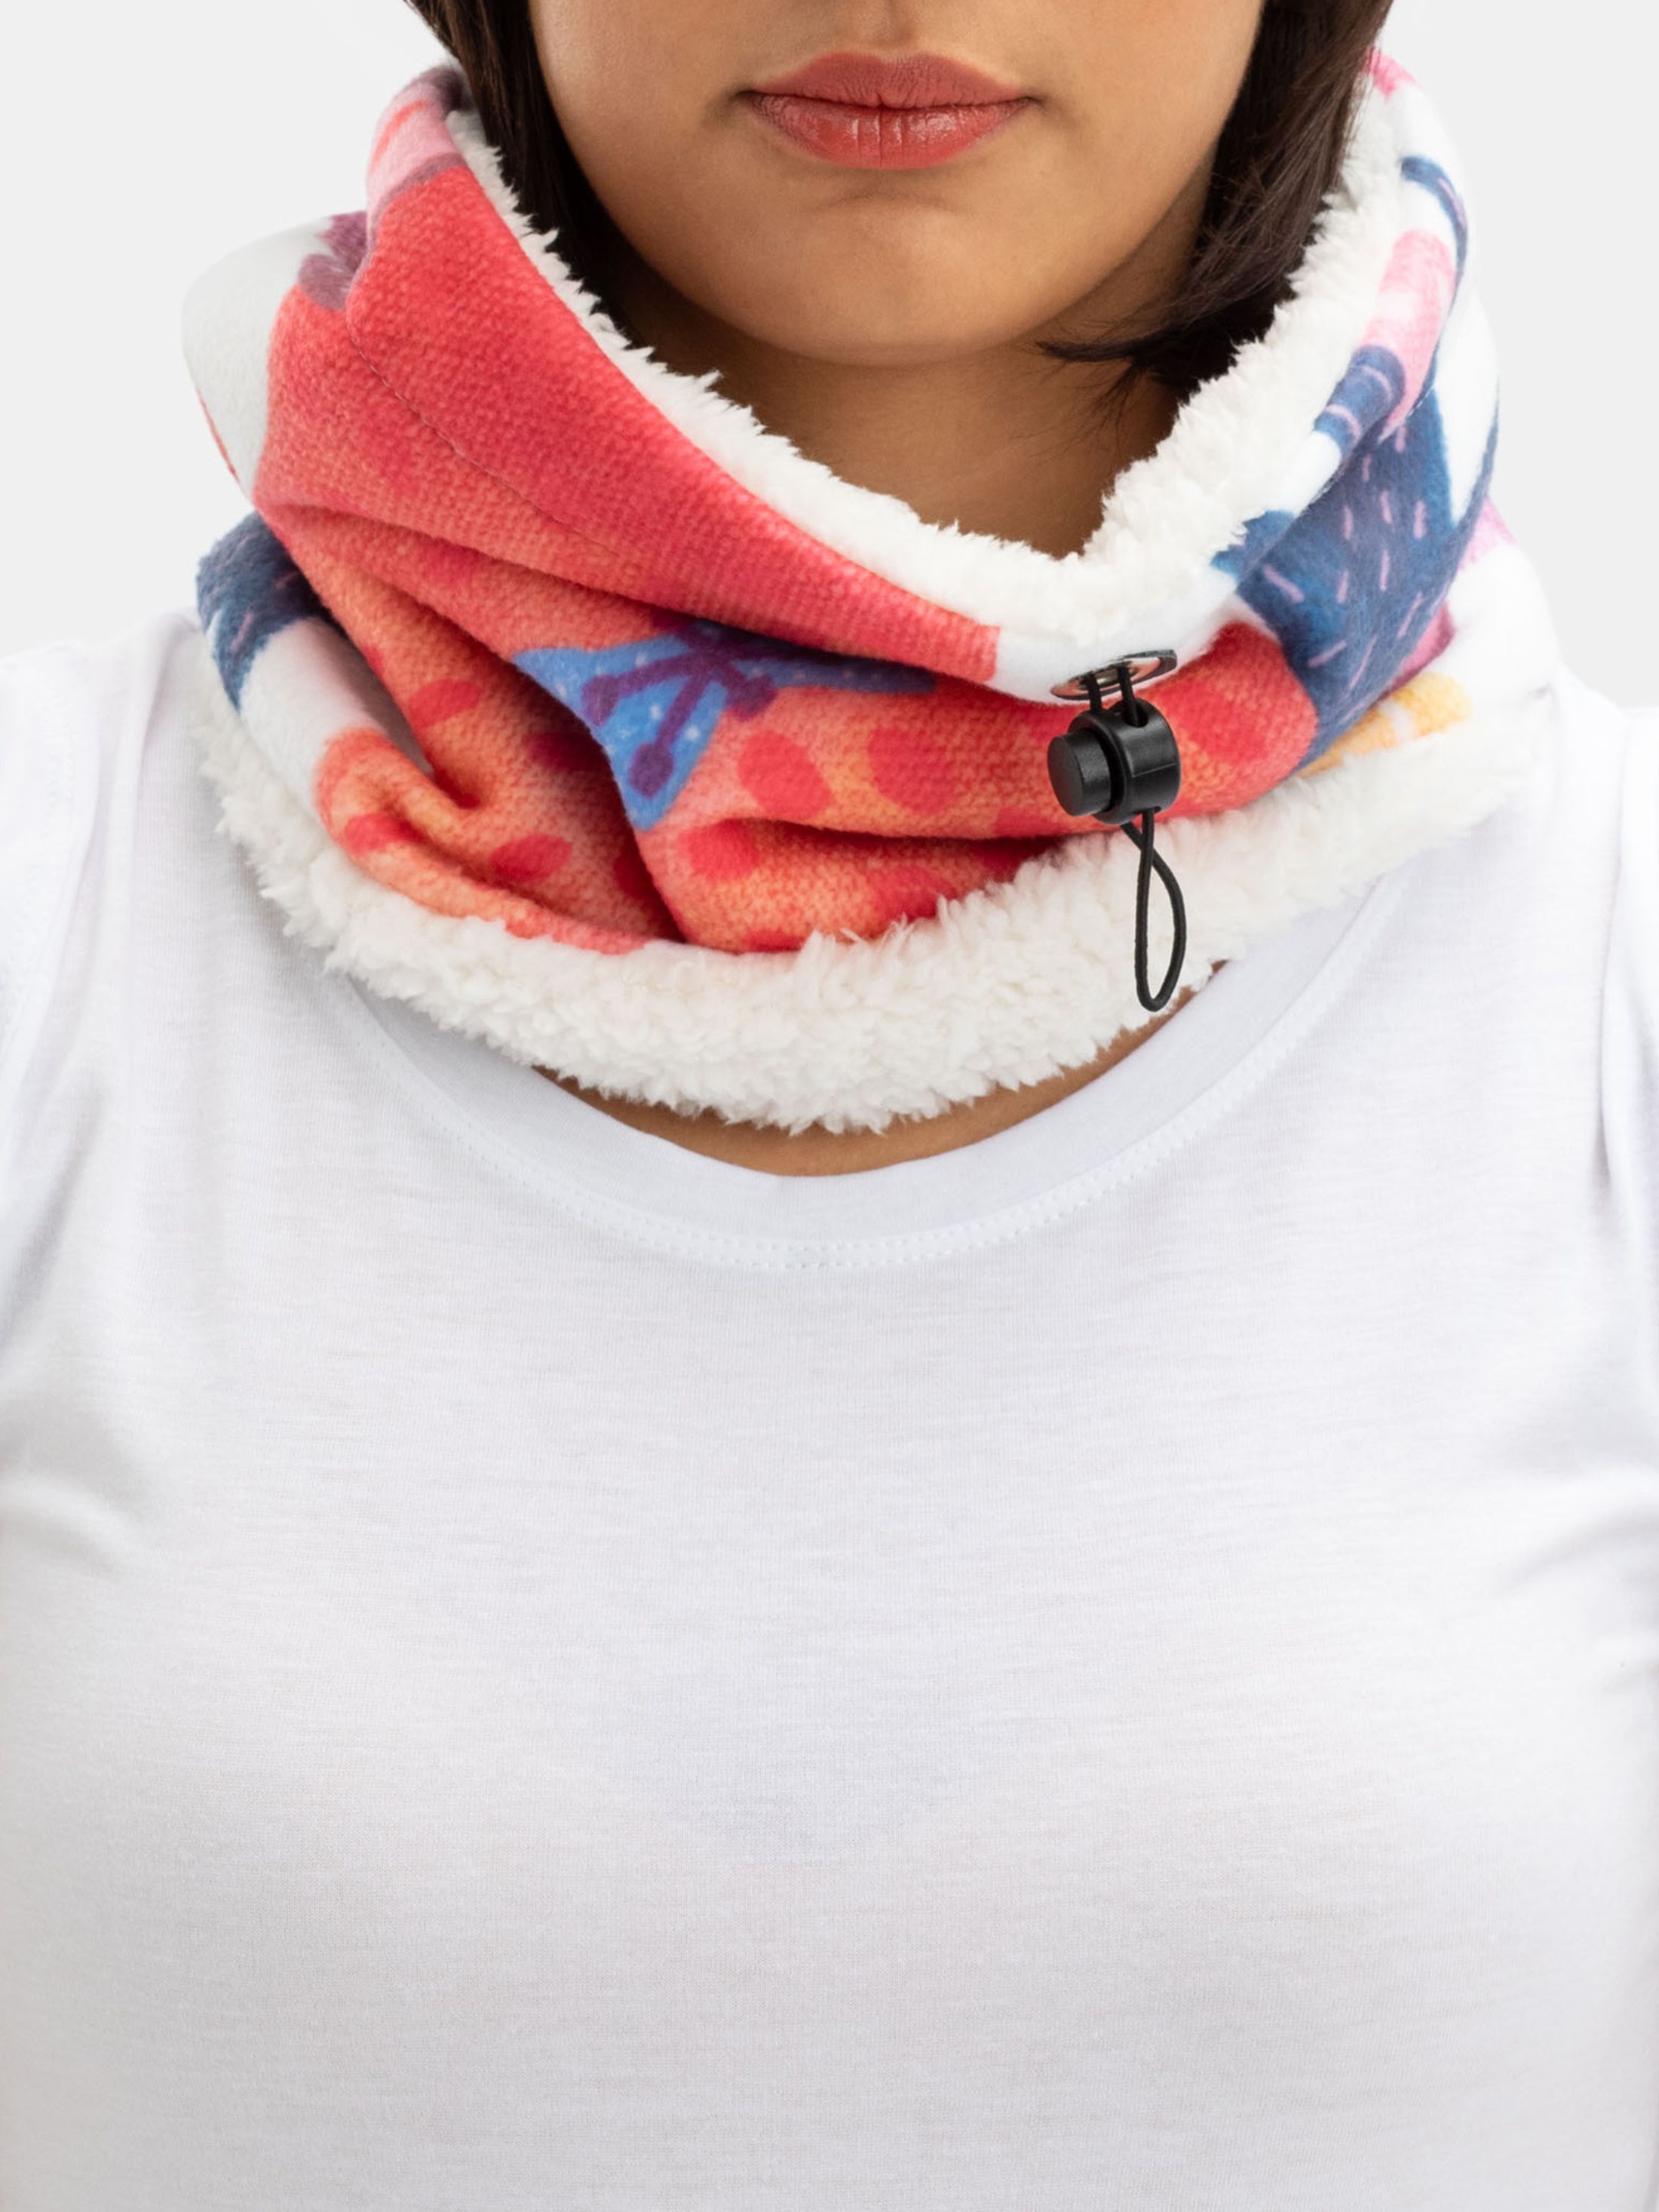 Printed Neck Warmer in the Snow